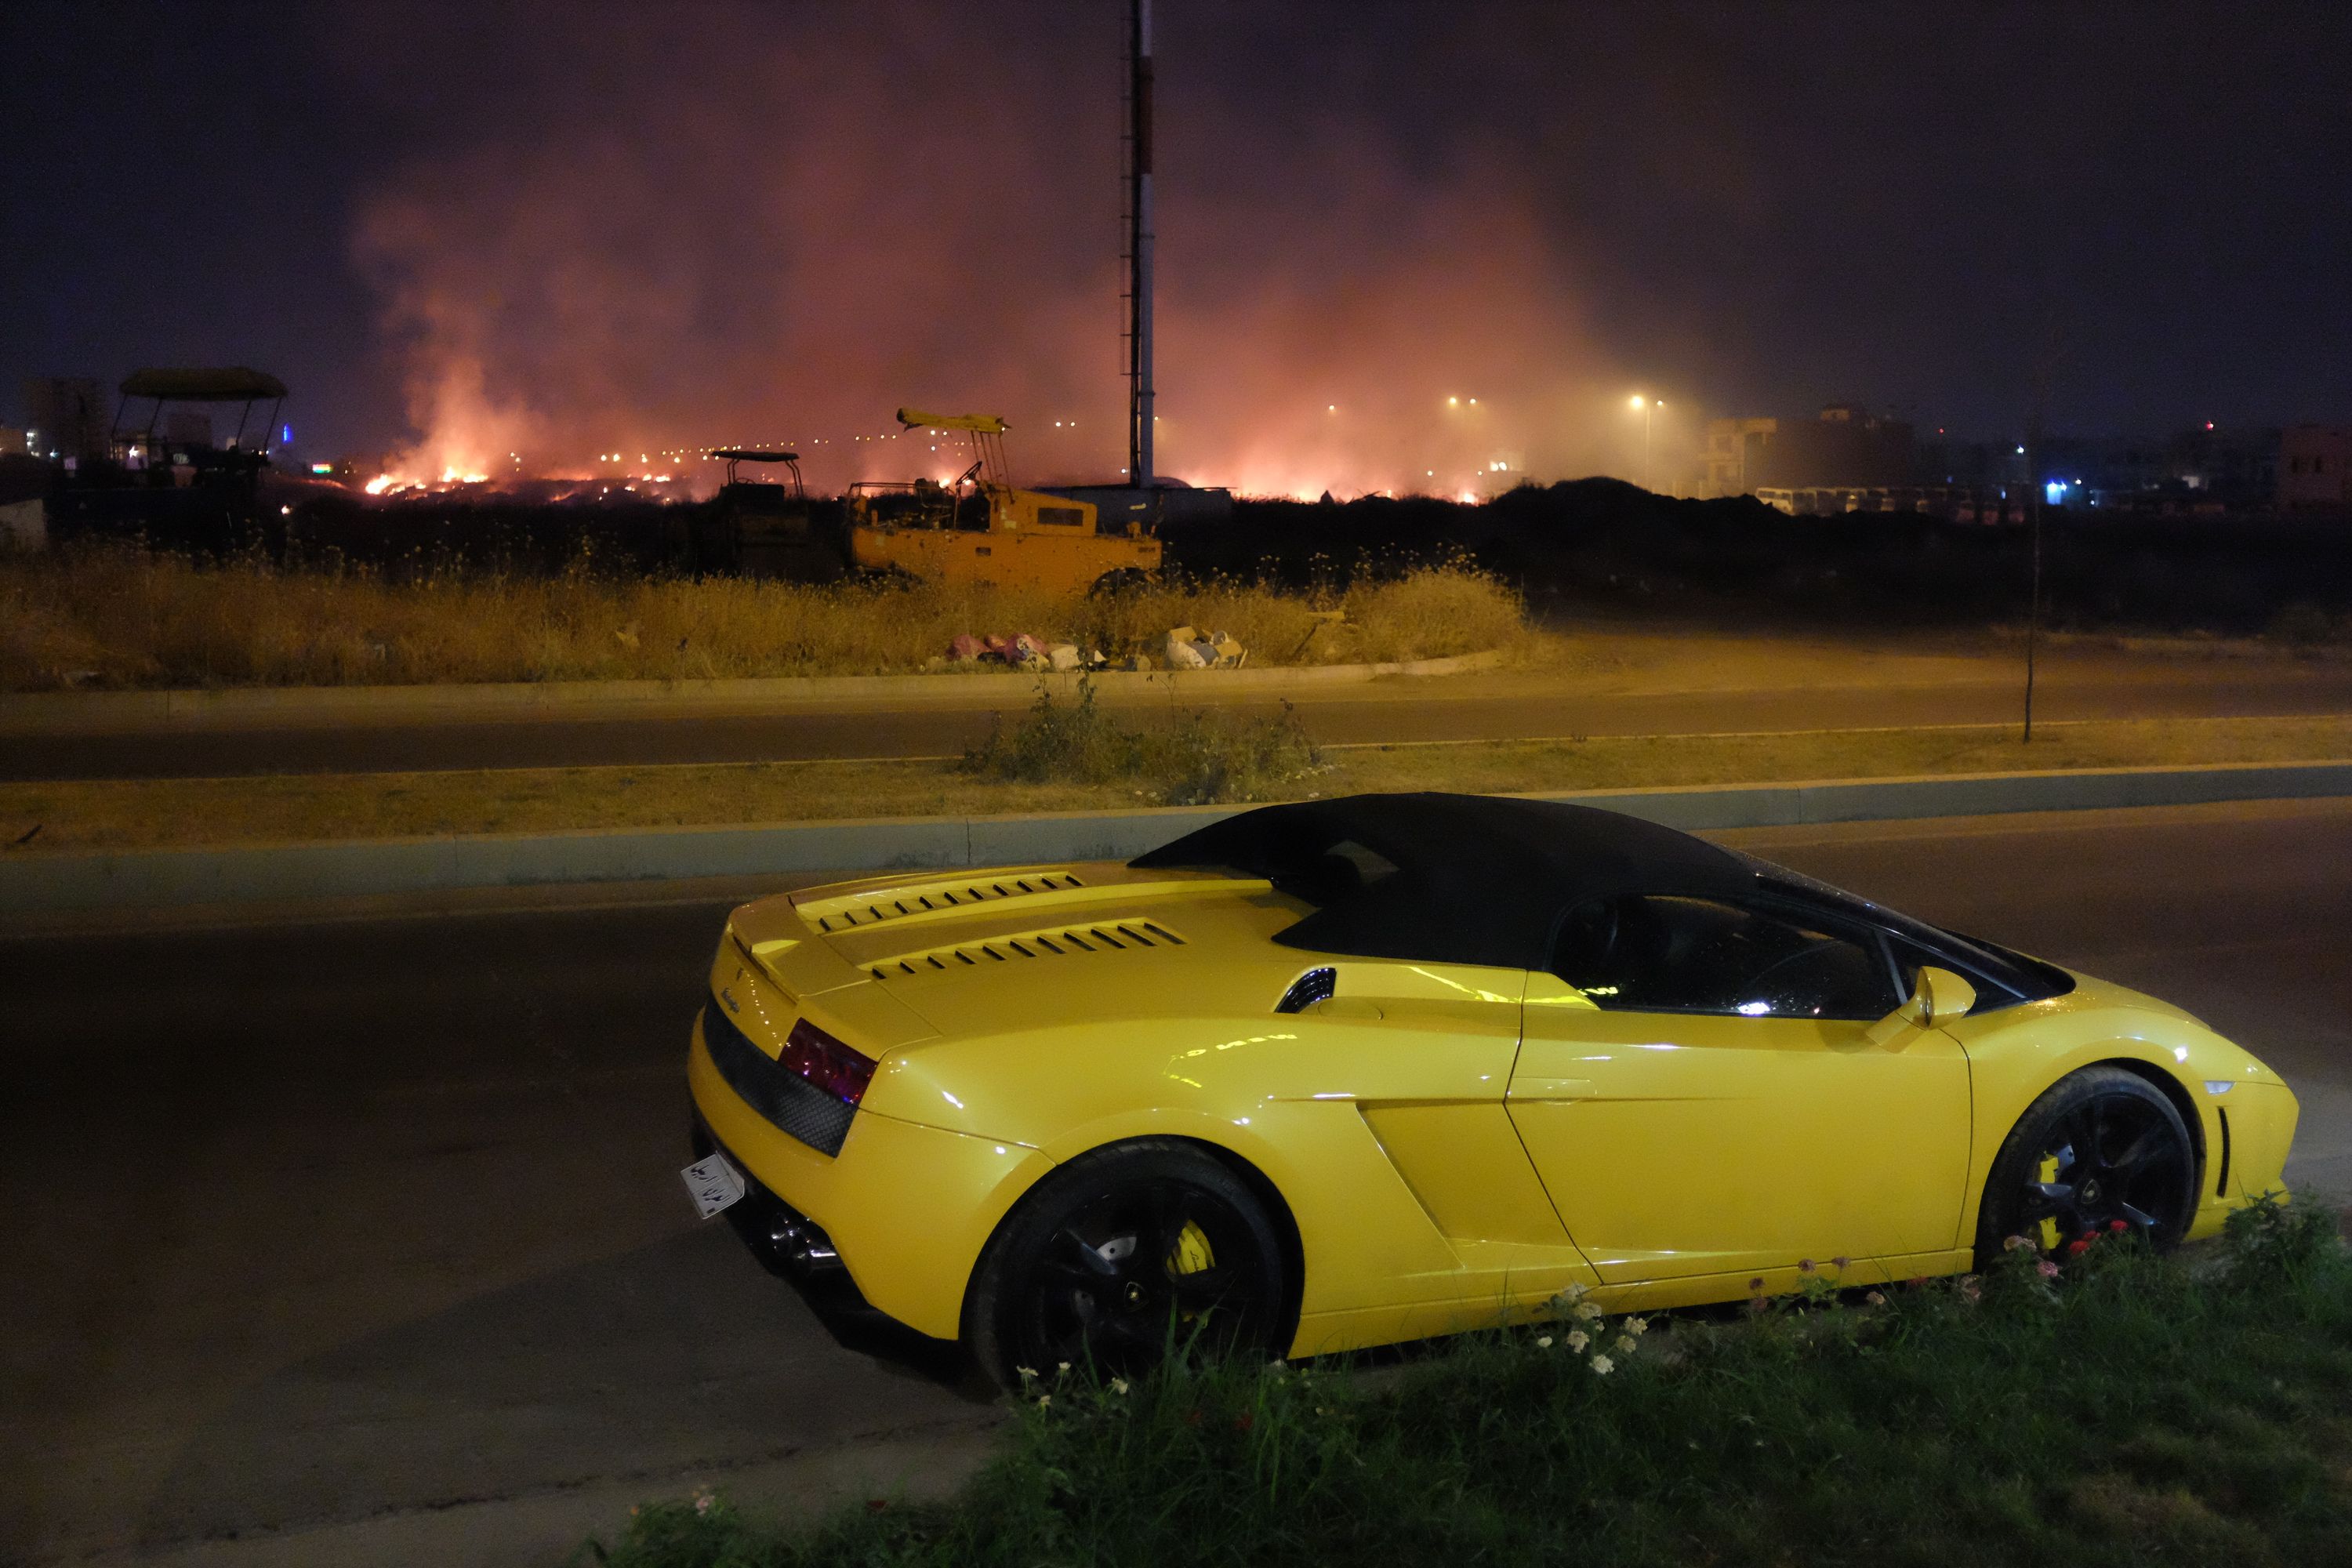 A yellow Lamborghini Gallardo parked across the road from what looks like an enormous trash fire which lights up the night sky.